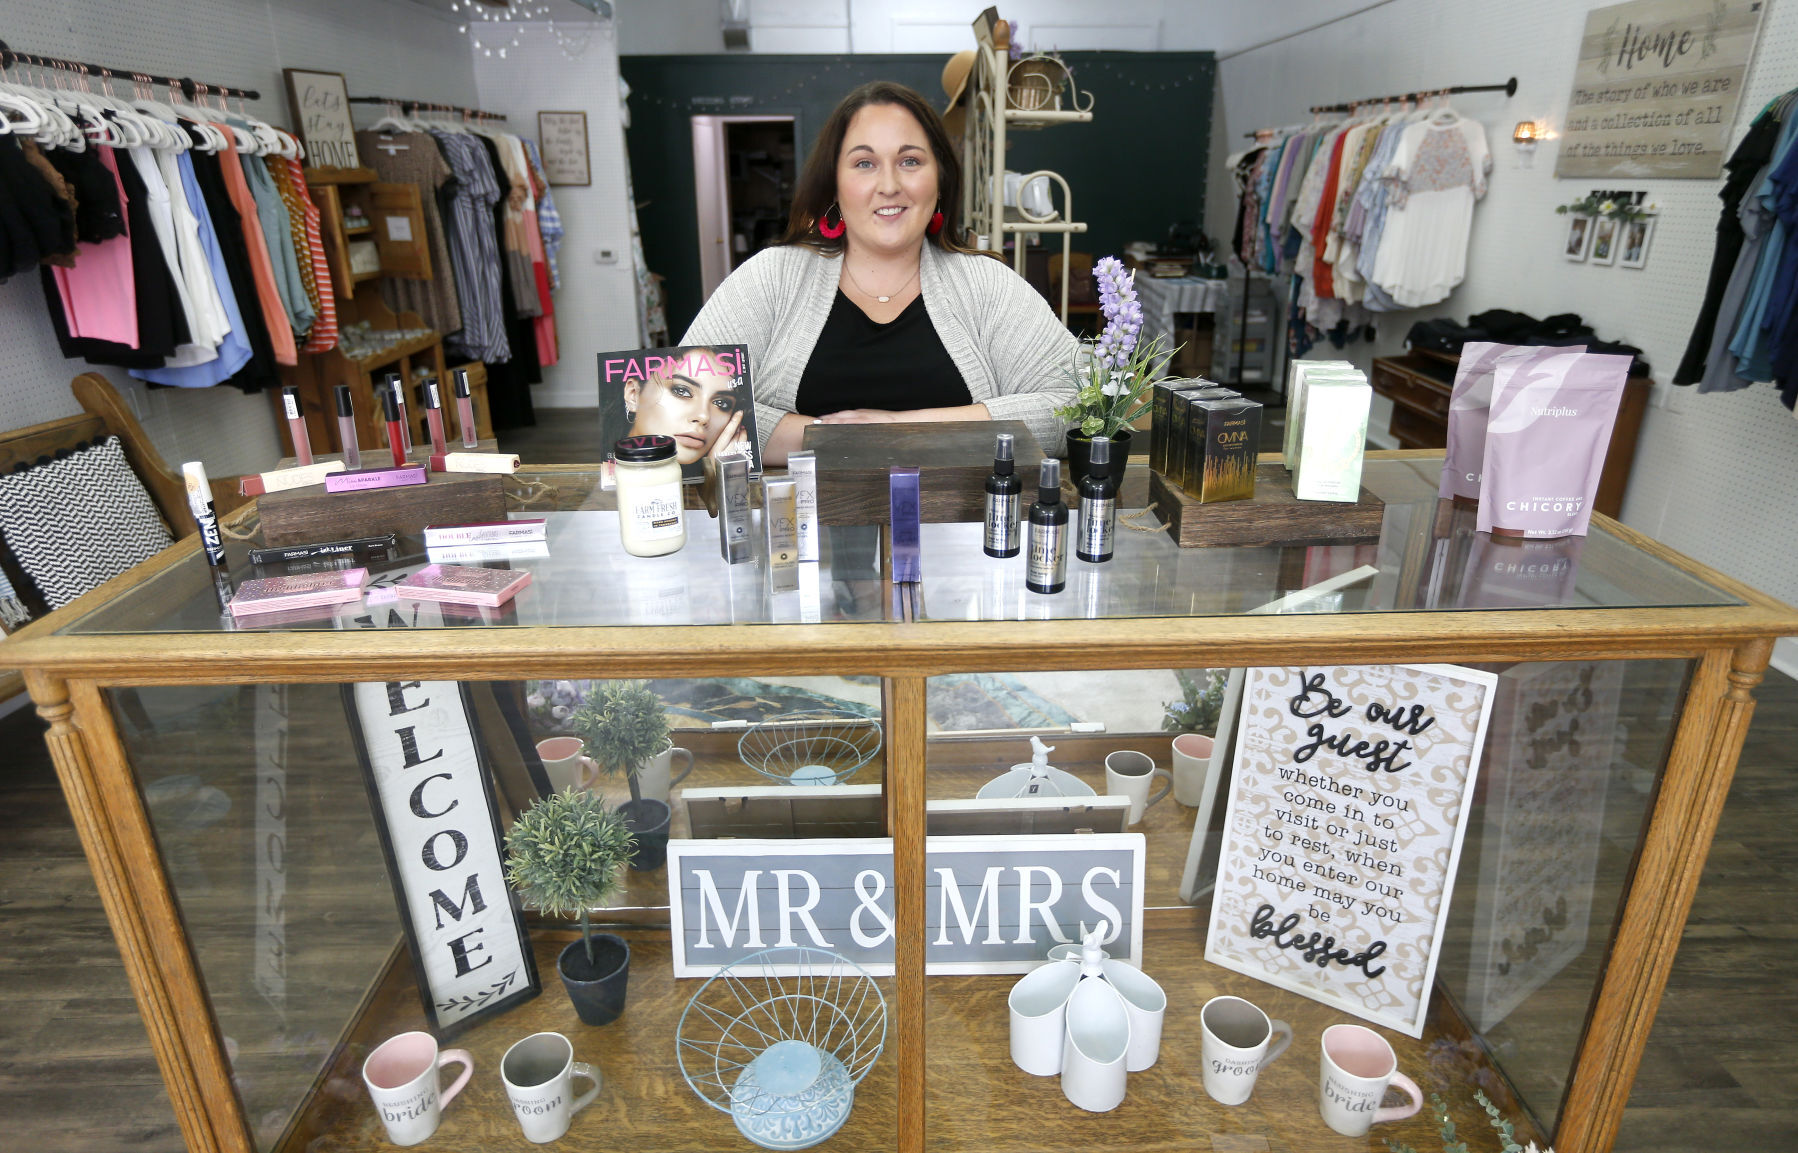 Joelle Davis is the owner of Emerald Grove Boutique located in Elkader, Iowa, on Friday, June 25, 2021.    PHOTO CREDIT: Dave Kettering